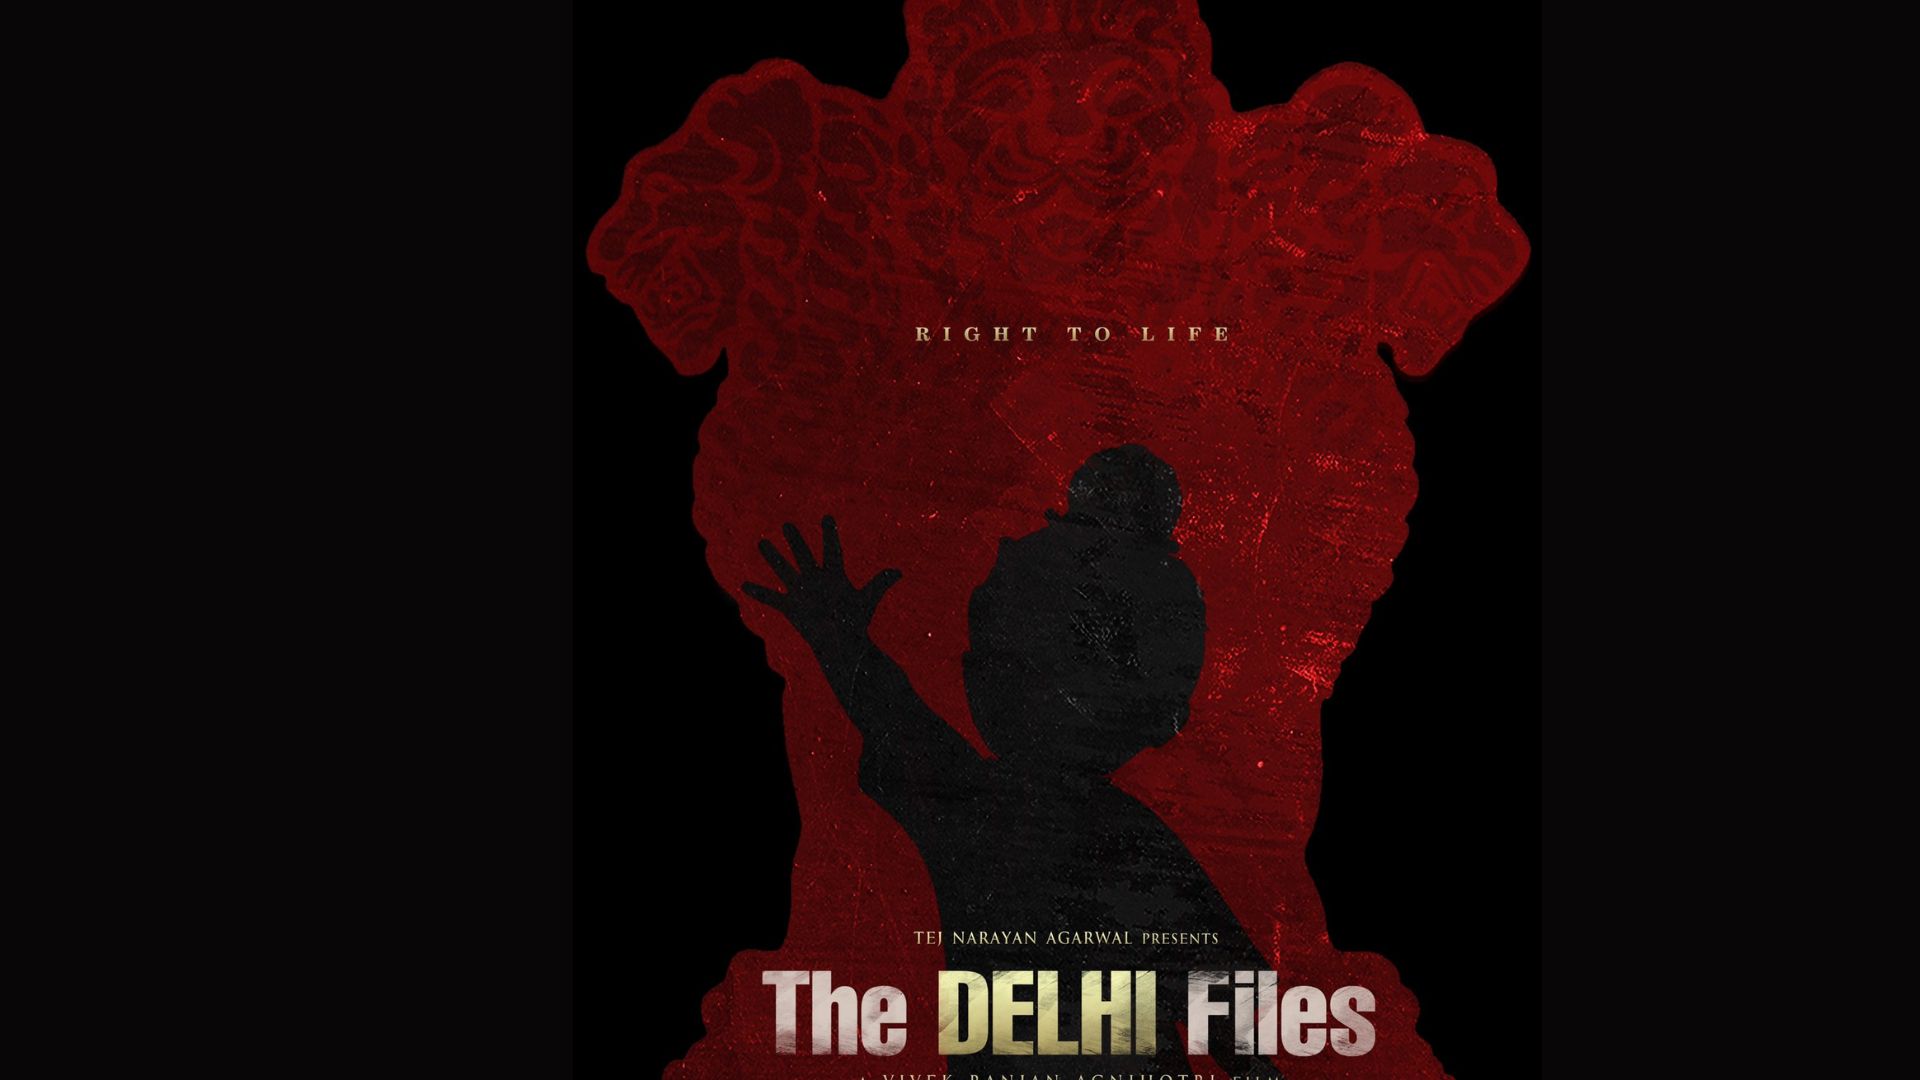 After 'The Kashmir Files', Vivek Agnihotri is looking for 'Gandhi' and 'Jinnah' for 'The Delhi Files'